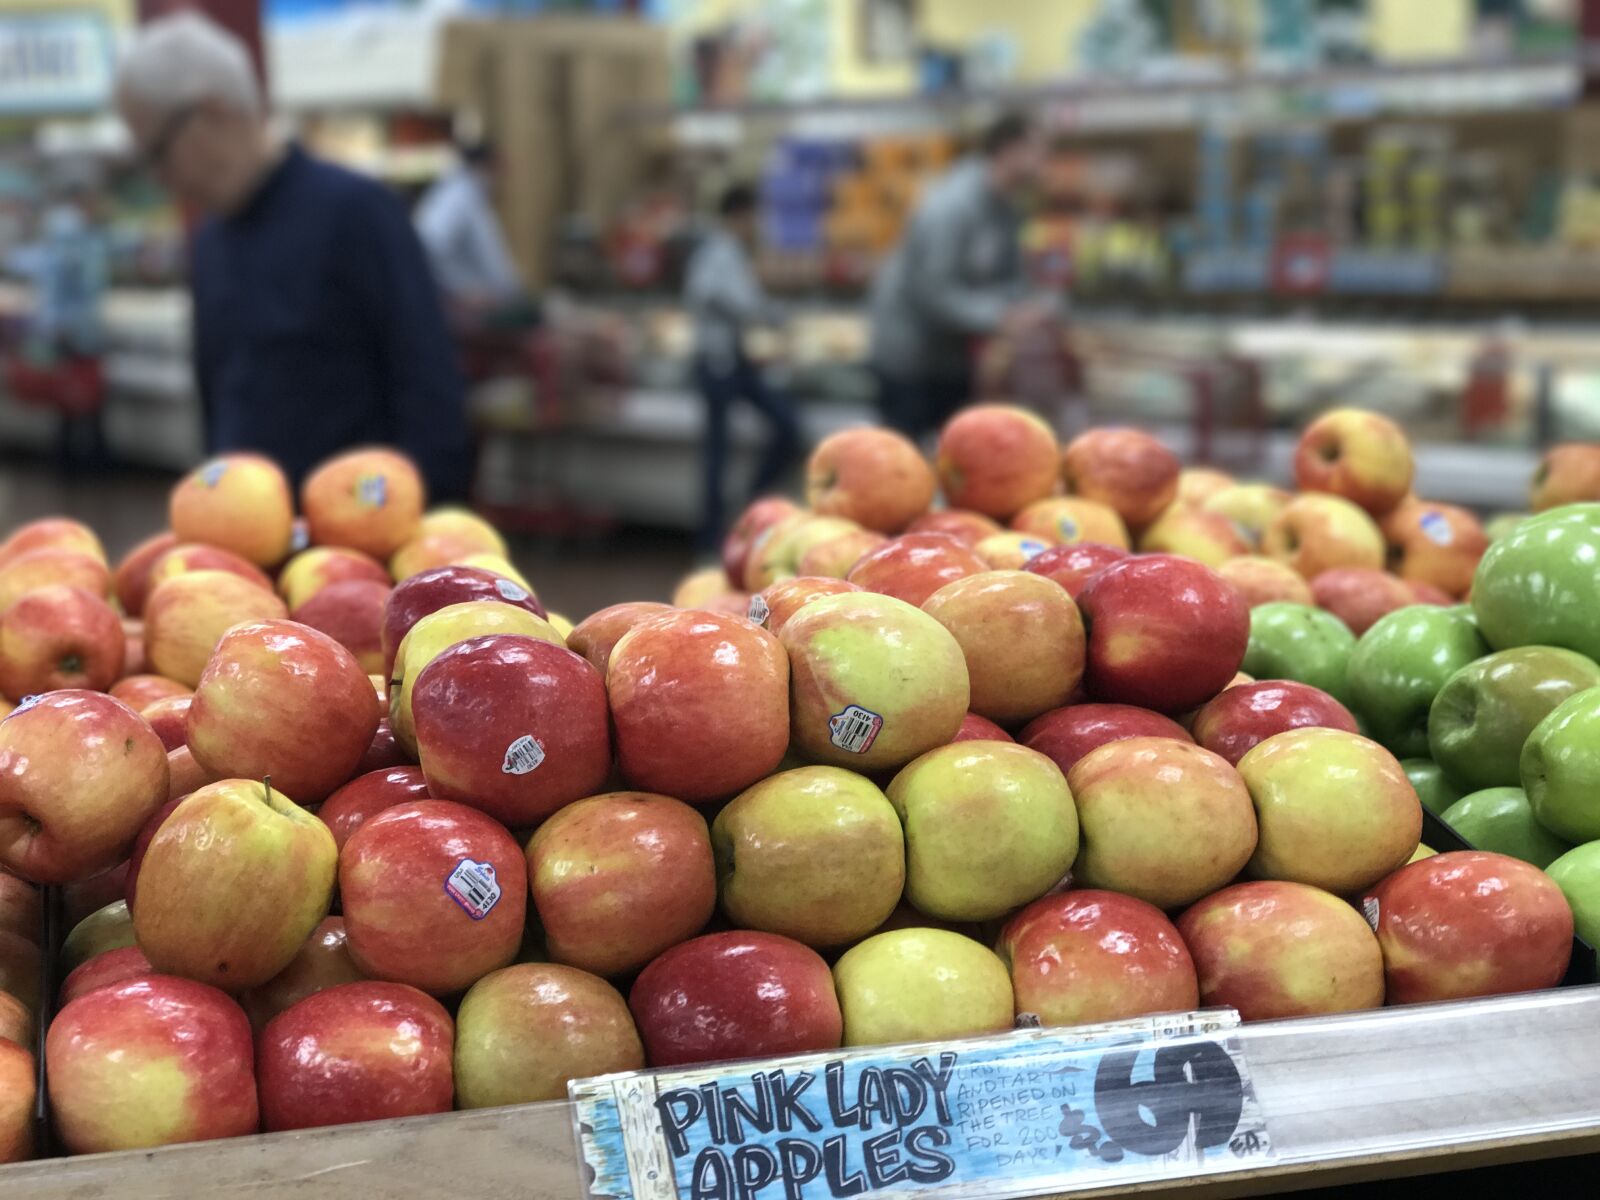 iPhone 7 Plus back iSight Duo camera 6.6mm f/2.8 sample photo. Apples, groceries photography